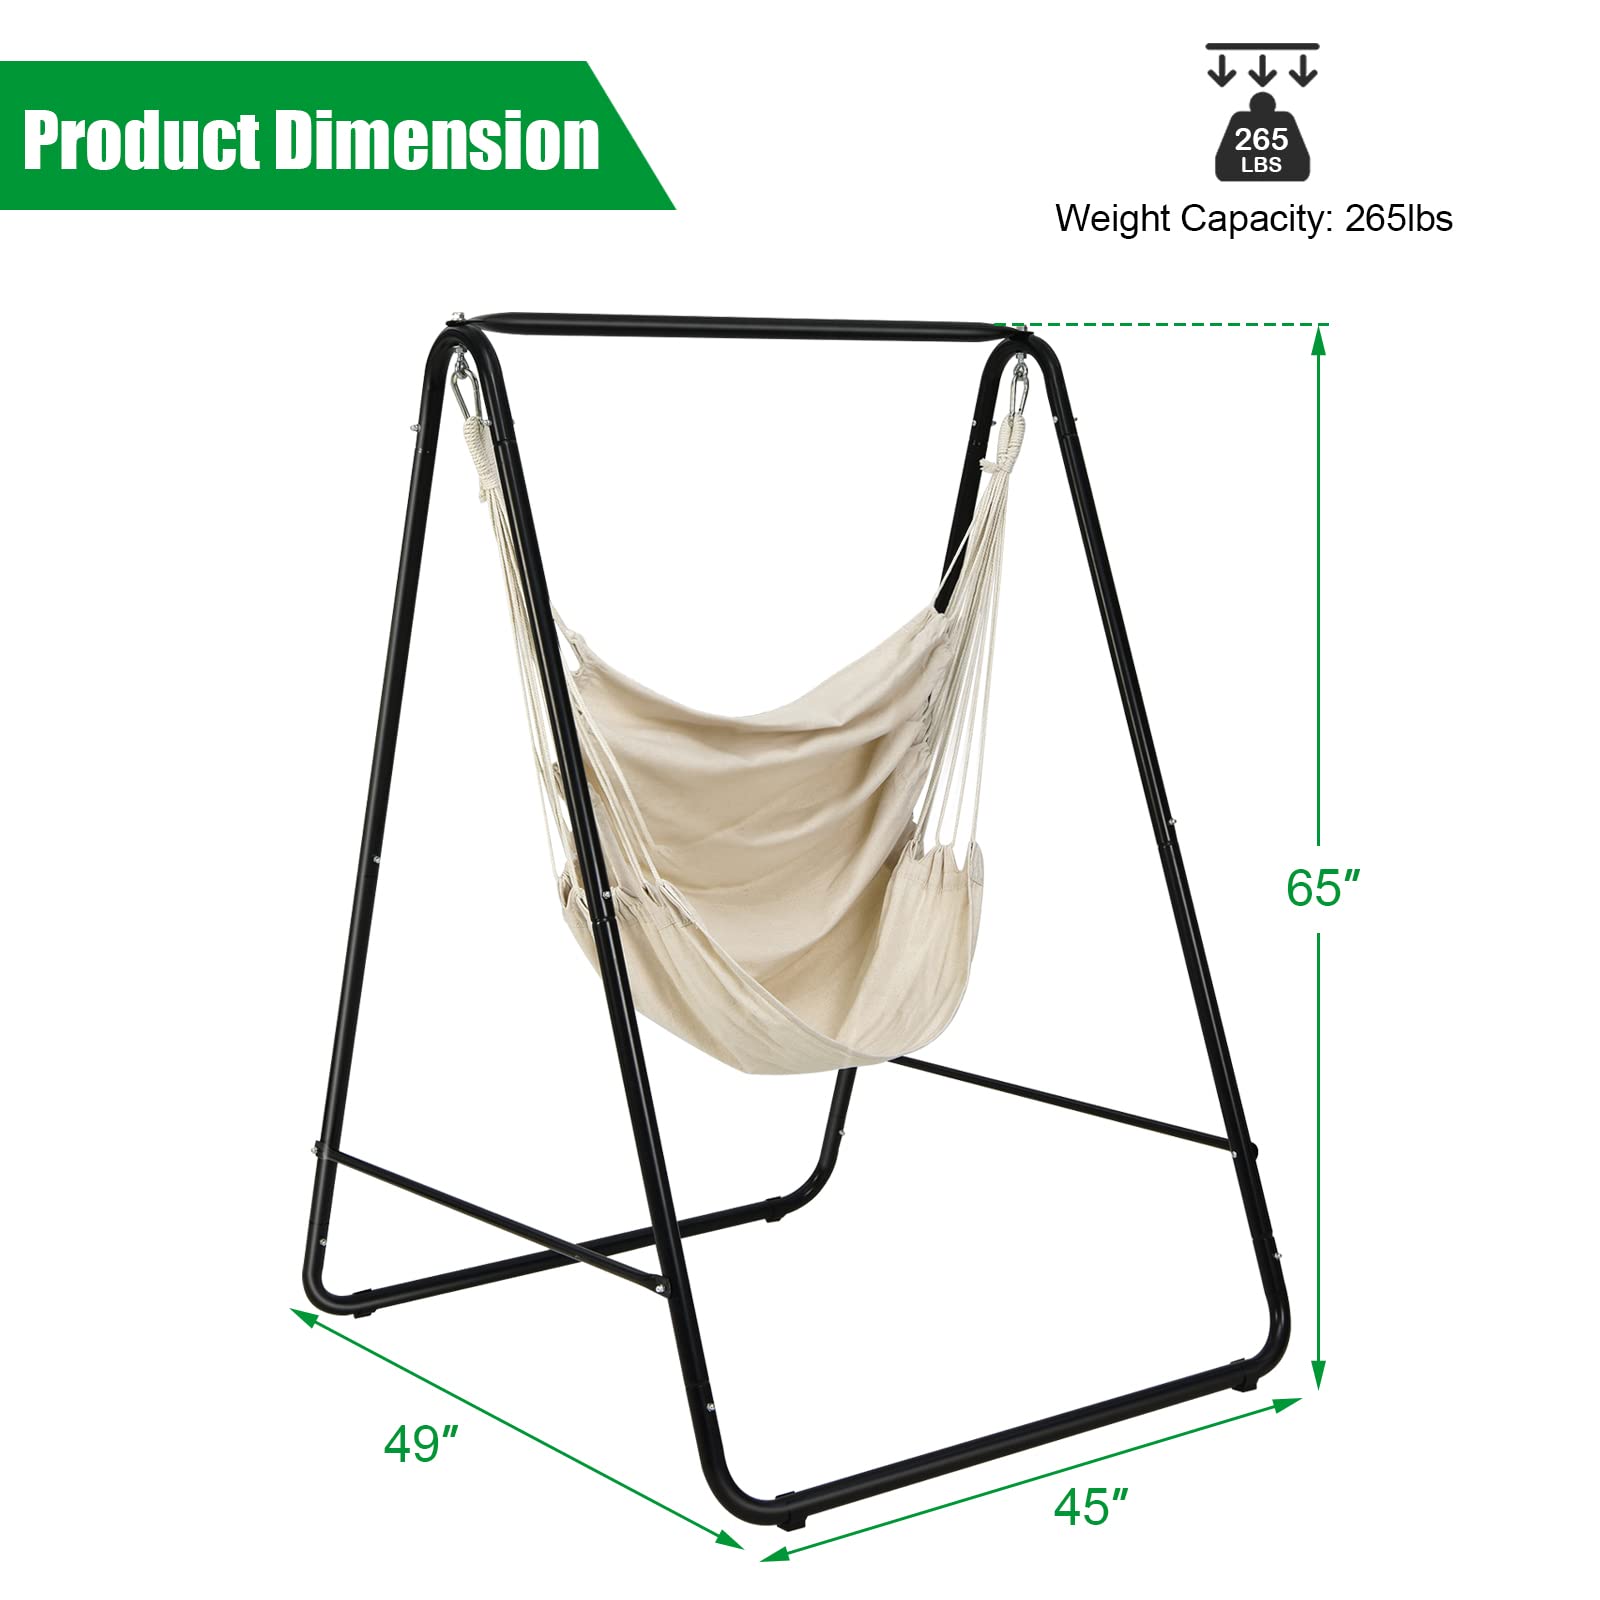 Heavy-Duty Powder-Coated Steel Stand with Hanging Swing Chair